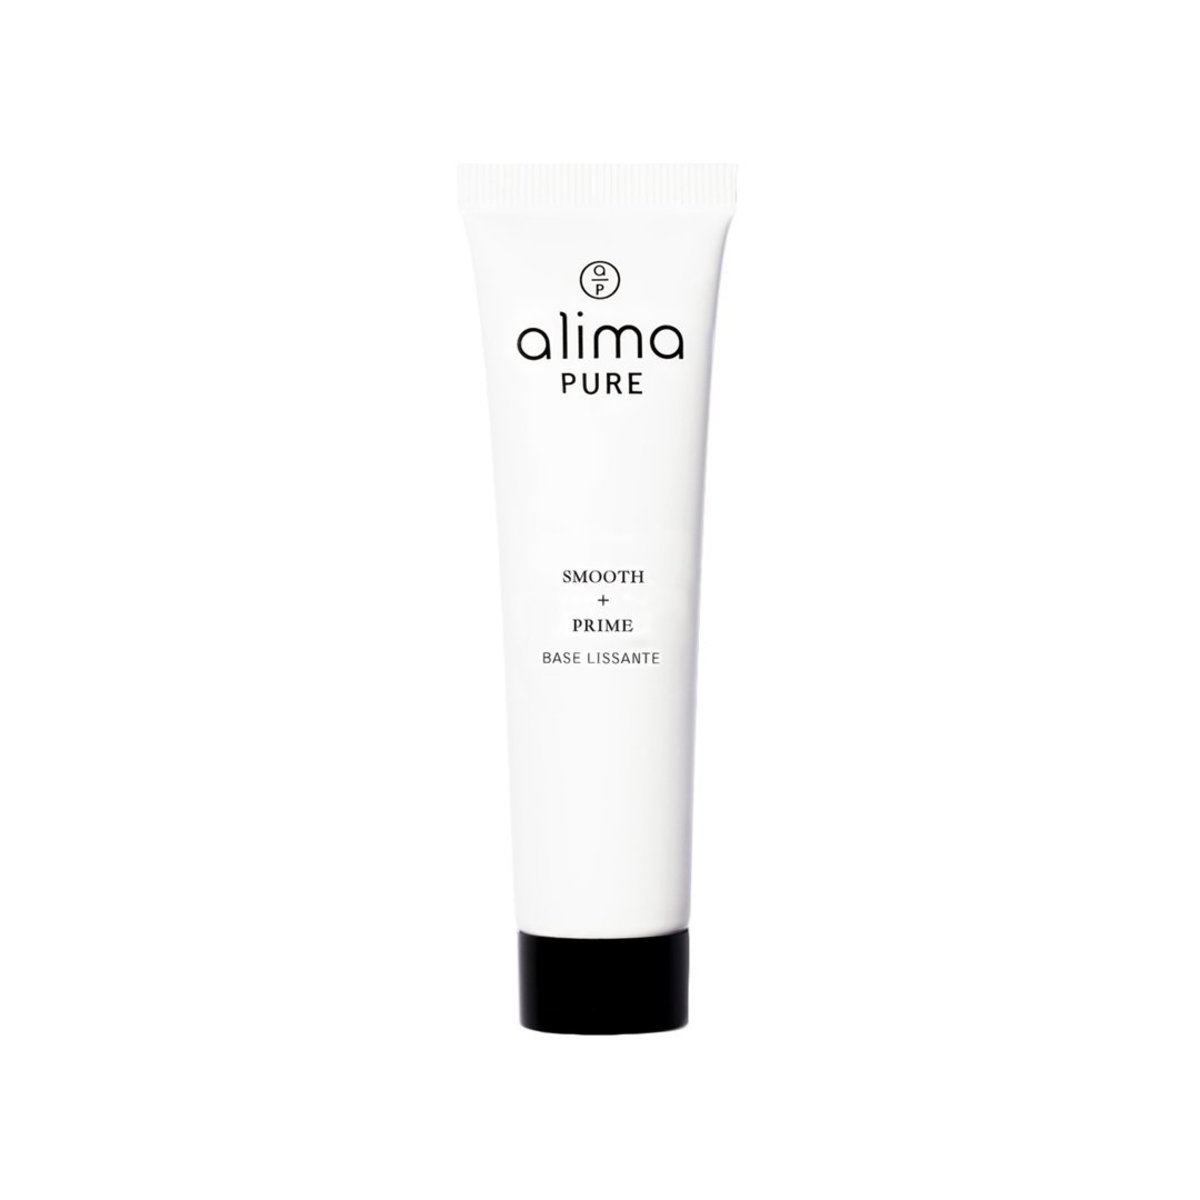 alima_pure_smooth_prime_at_credo_beauty